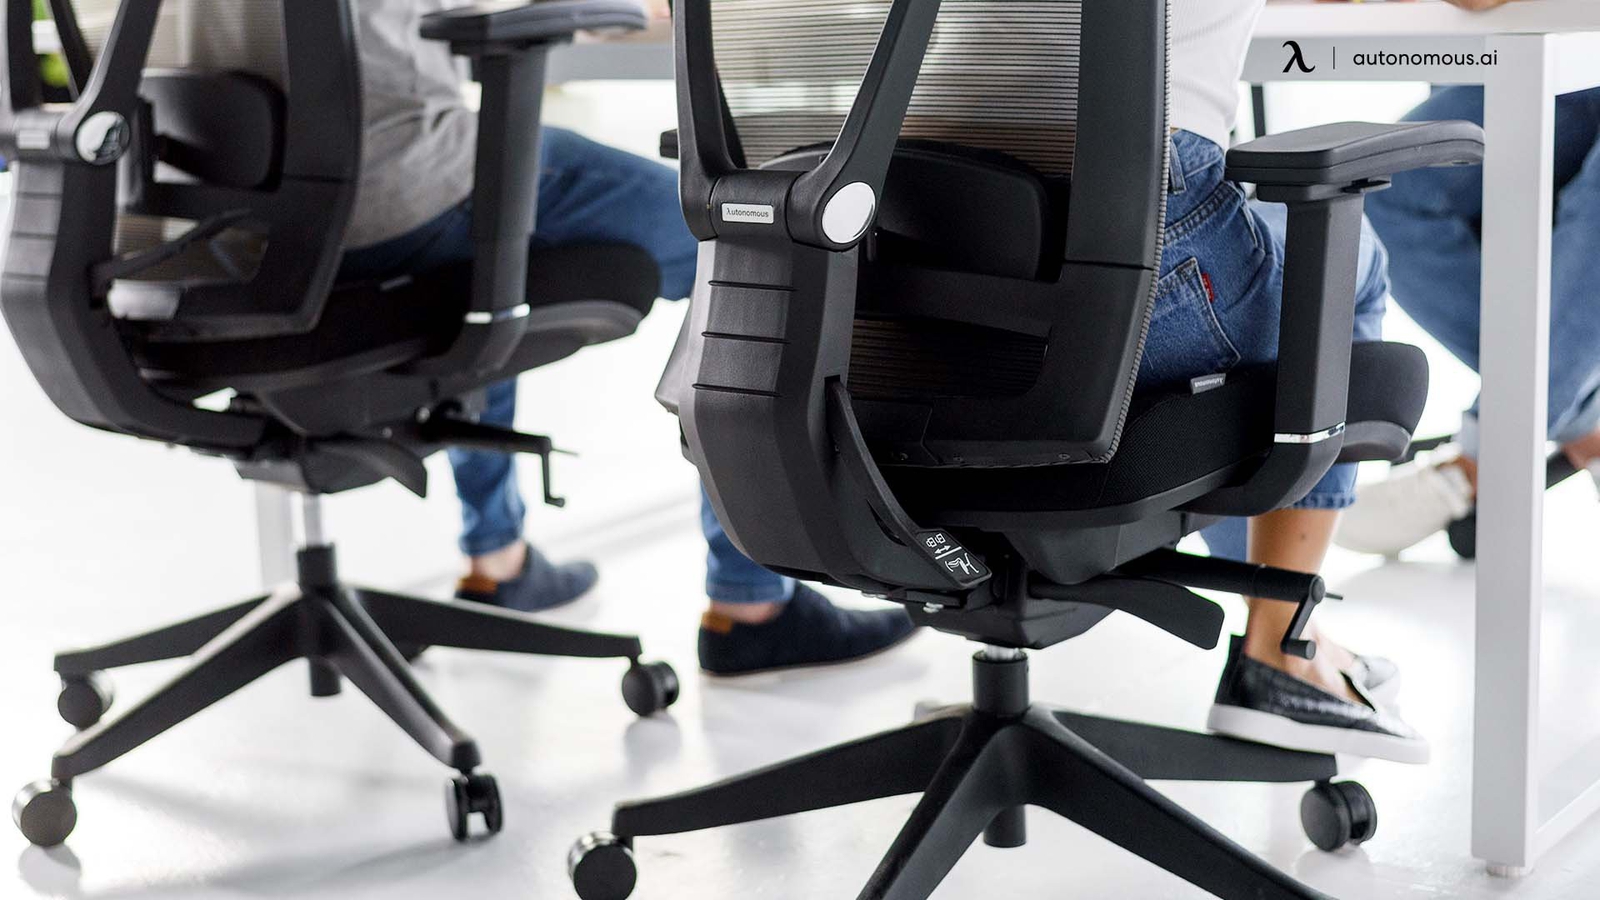 24 Hour Chair | 24/7 Office Chair for Comfortable Sitting